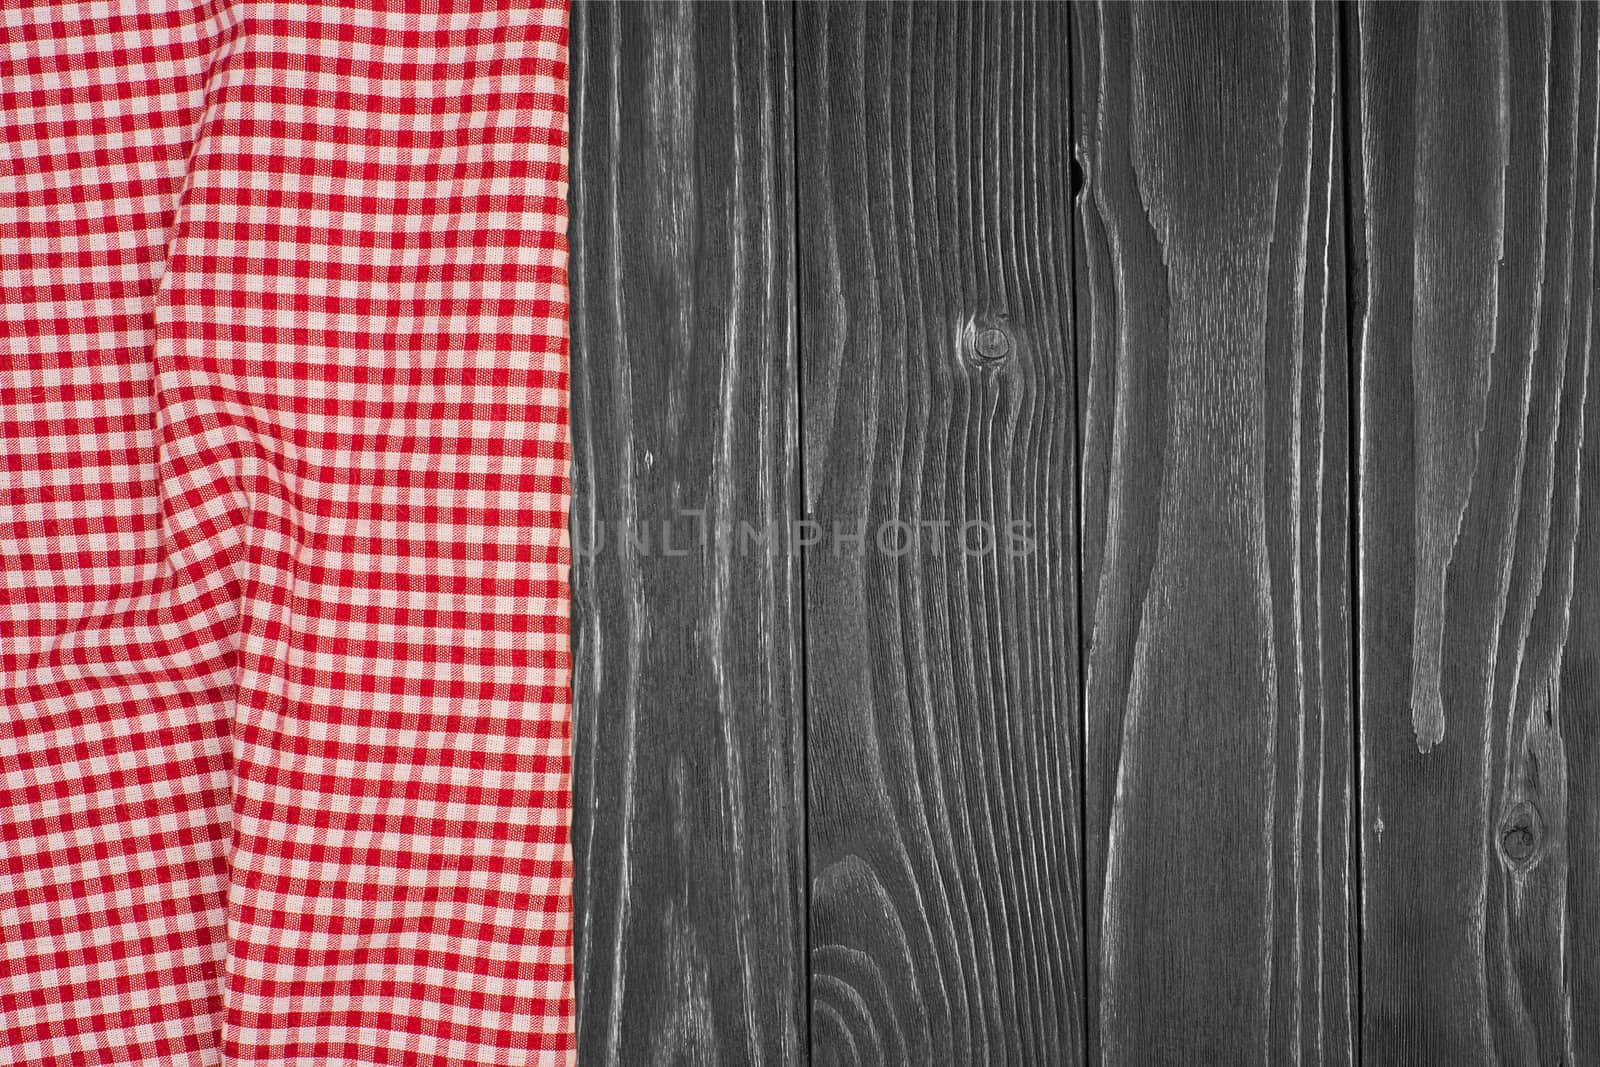 the checkered tablecloth on wooden table by DGolbay